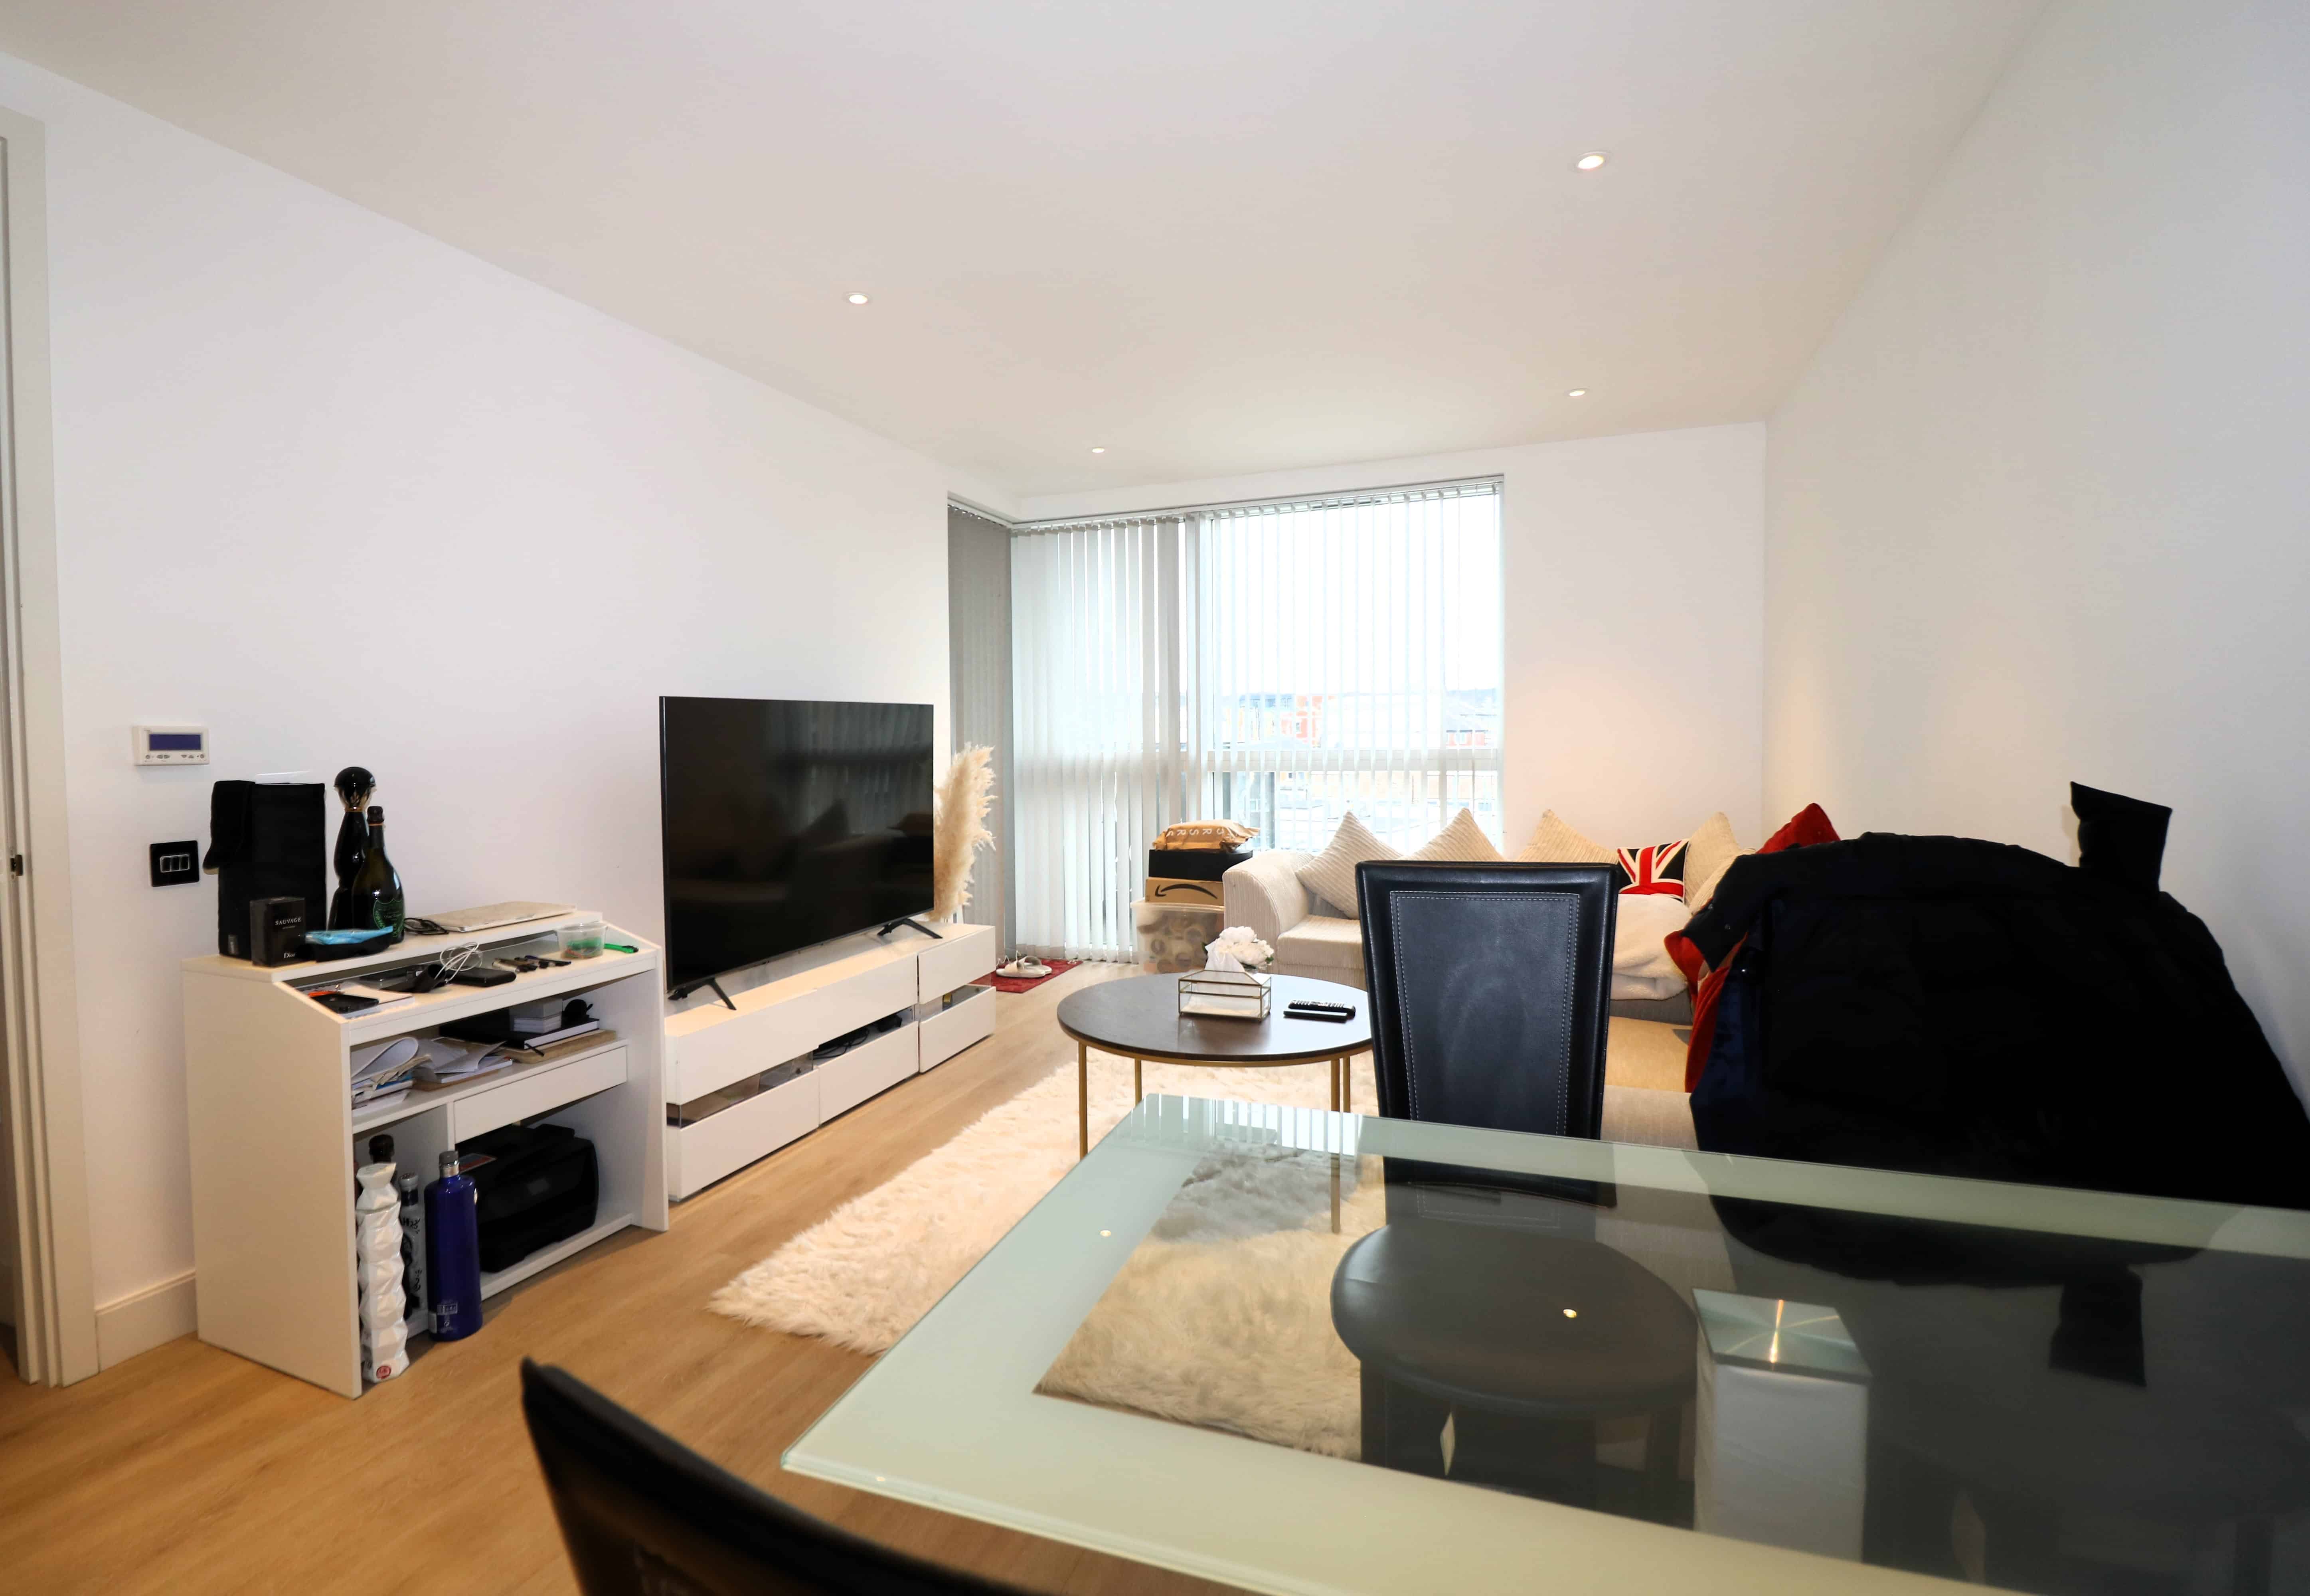 Third floor two bed apartment with two bathroom and modern stylish living quarters in the leafy area of Hornsey, N8